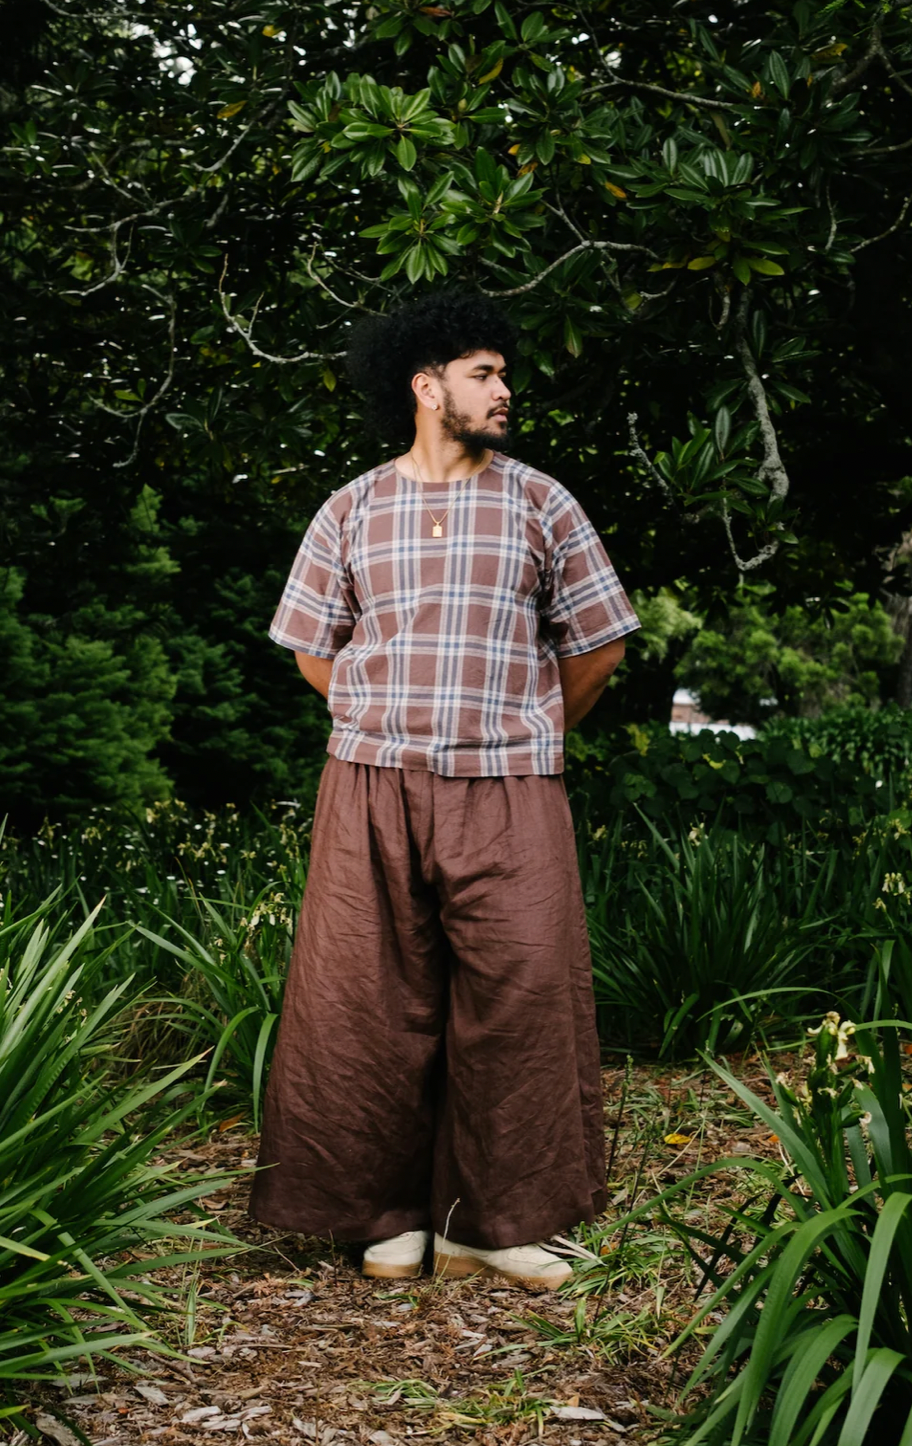 Wing Pants - Chocolate Linen by Papa Clothing